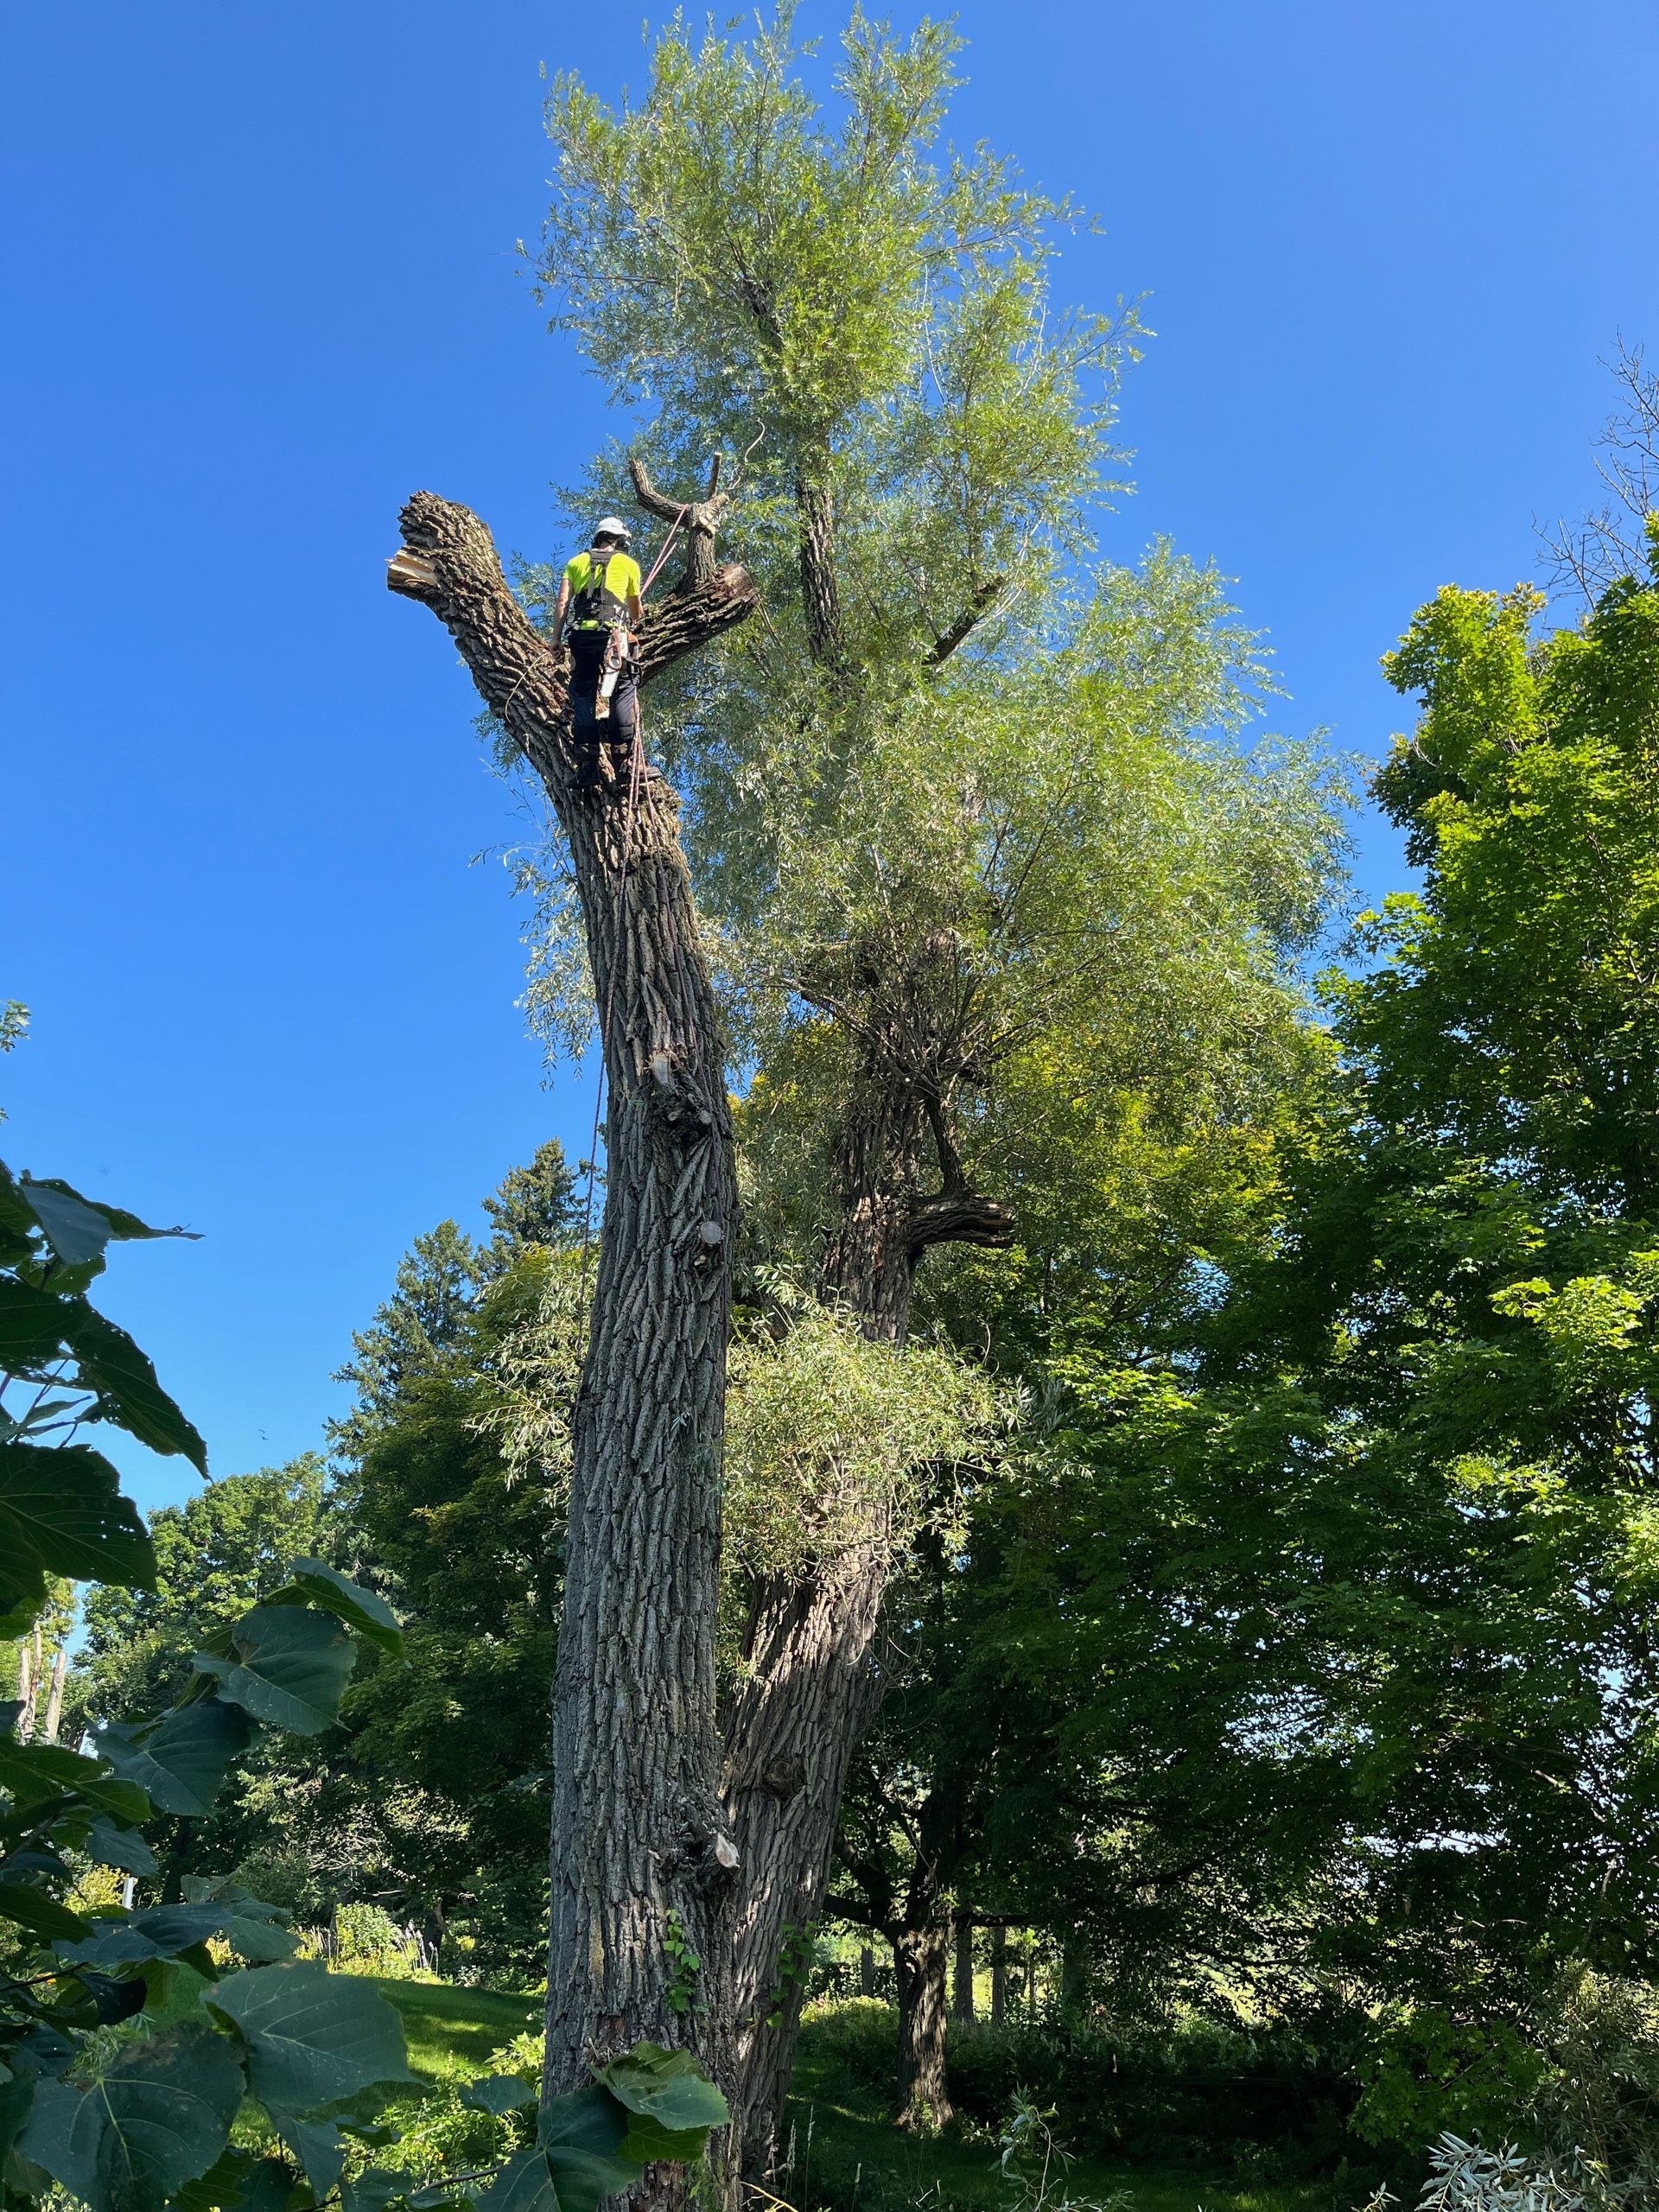 The importance of expert tree trimming and pruning